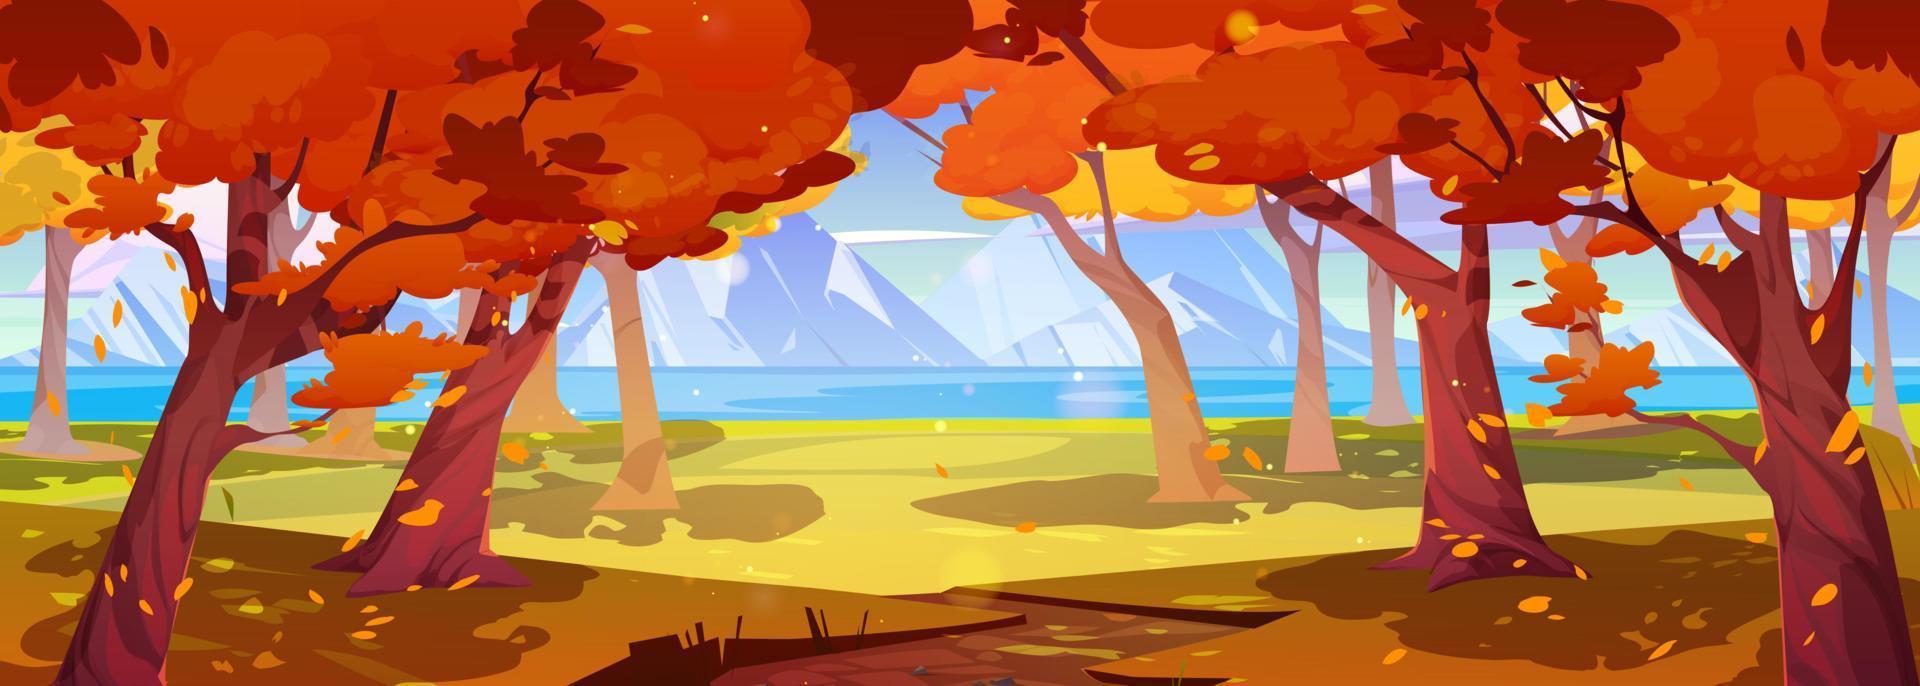 Forest autumn valley scene with lake, mountain vector